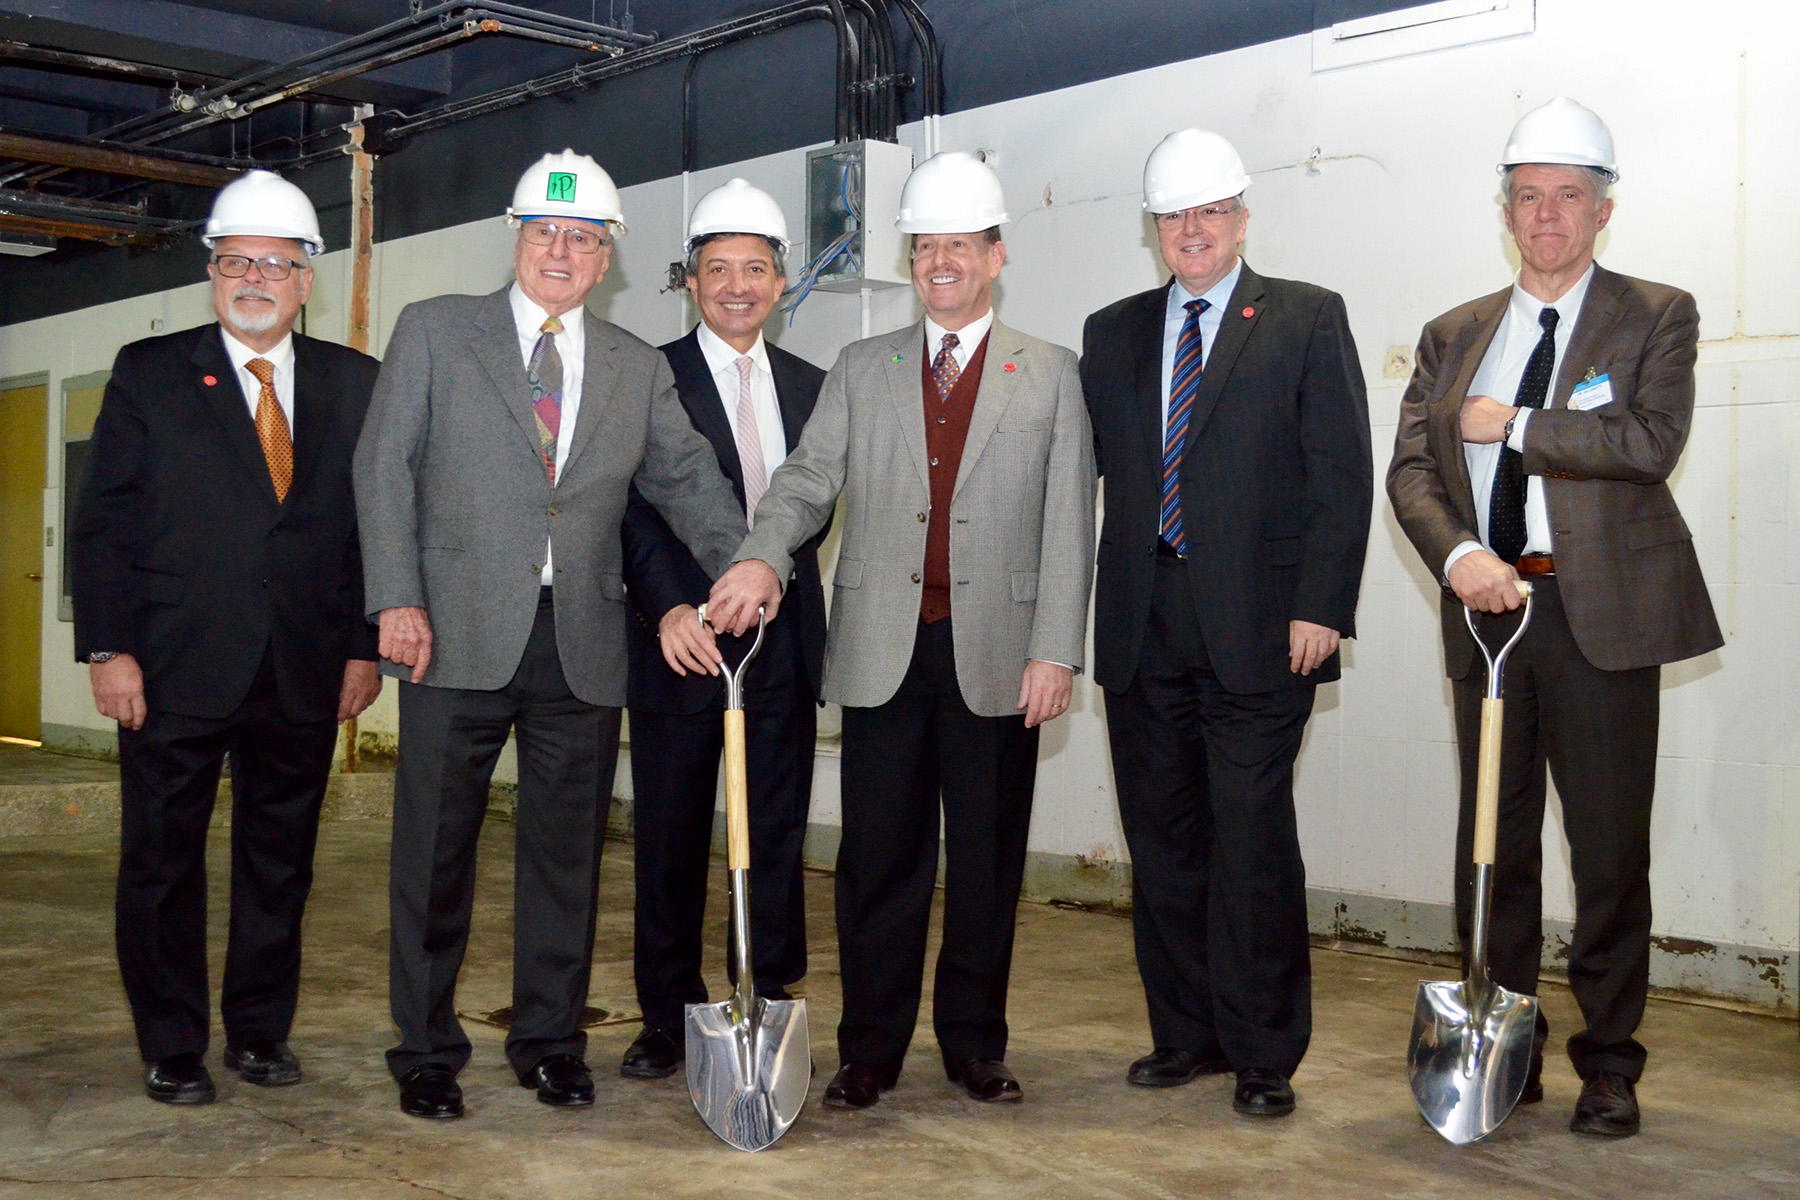 gentlemen with shovels gather for surgical, robotic center groundbreaking
                  